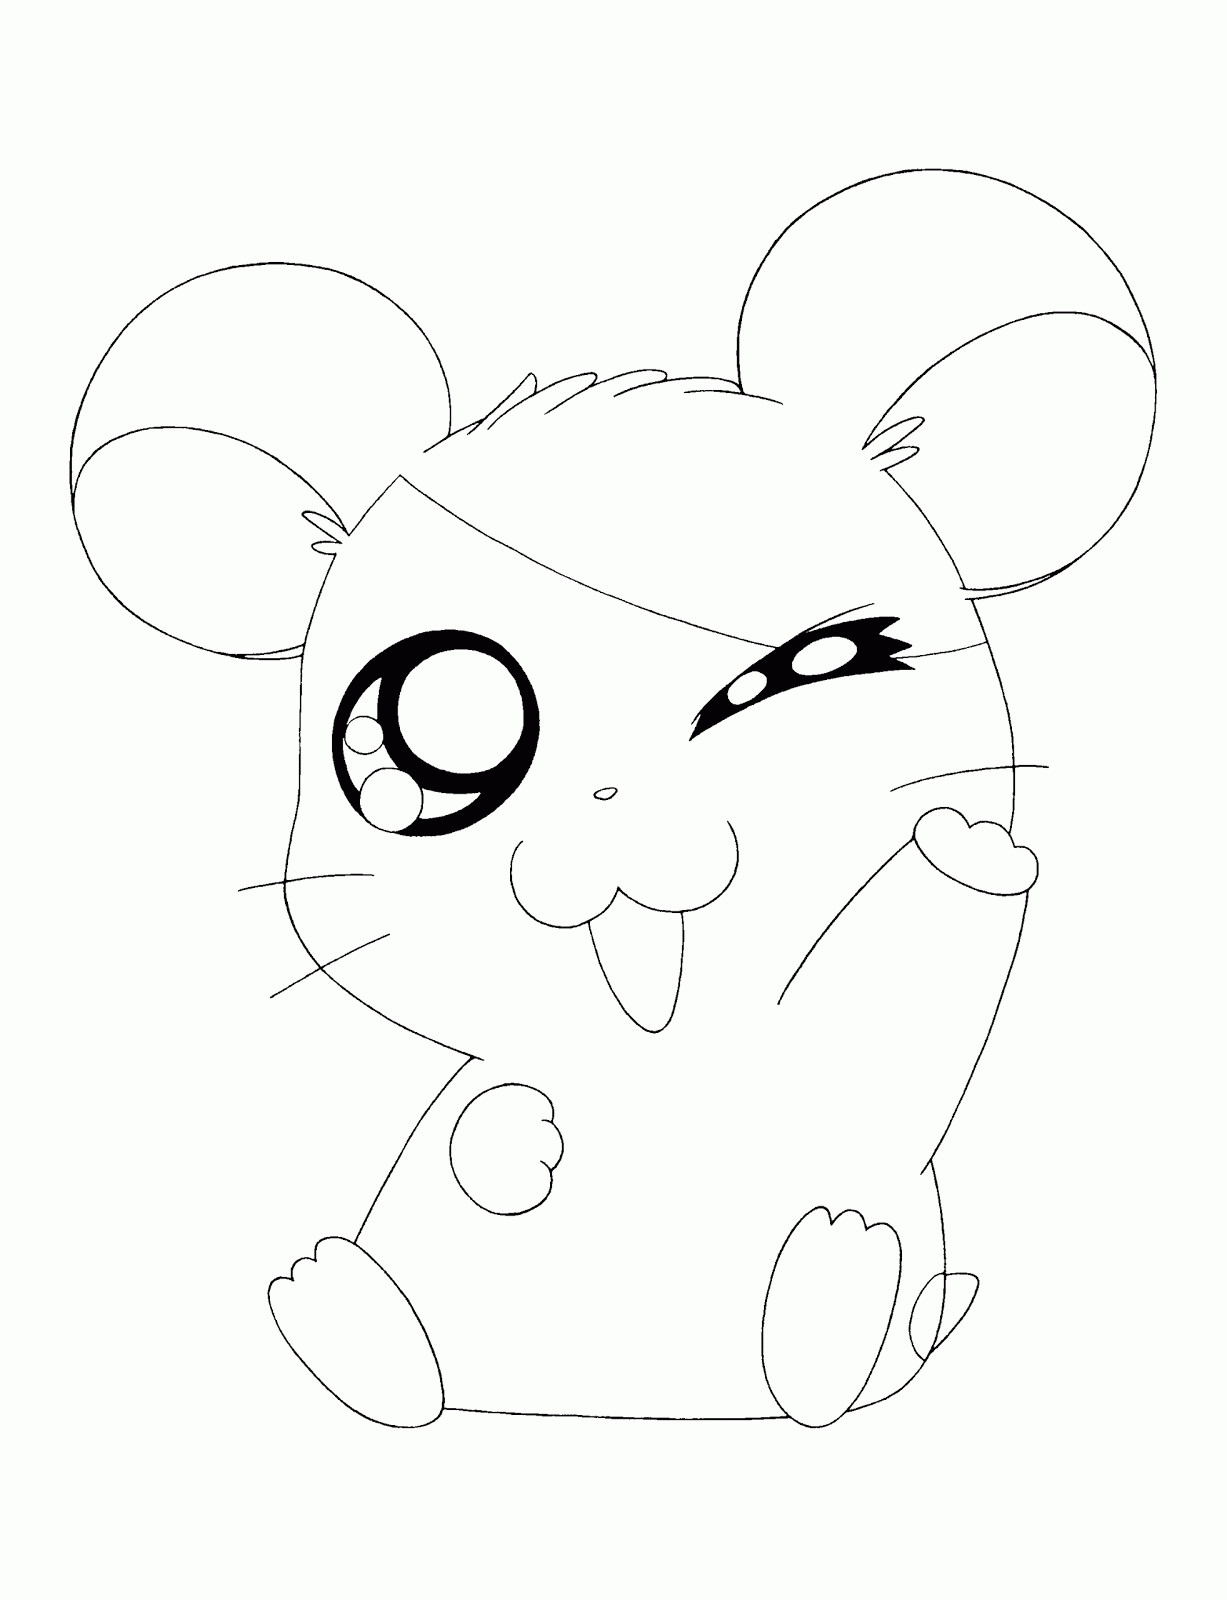 Free Coloring Pages Of Cute Animals
 Cute Baby Animal Coloring Pages 18 Image – Colorings